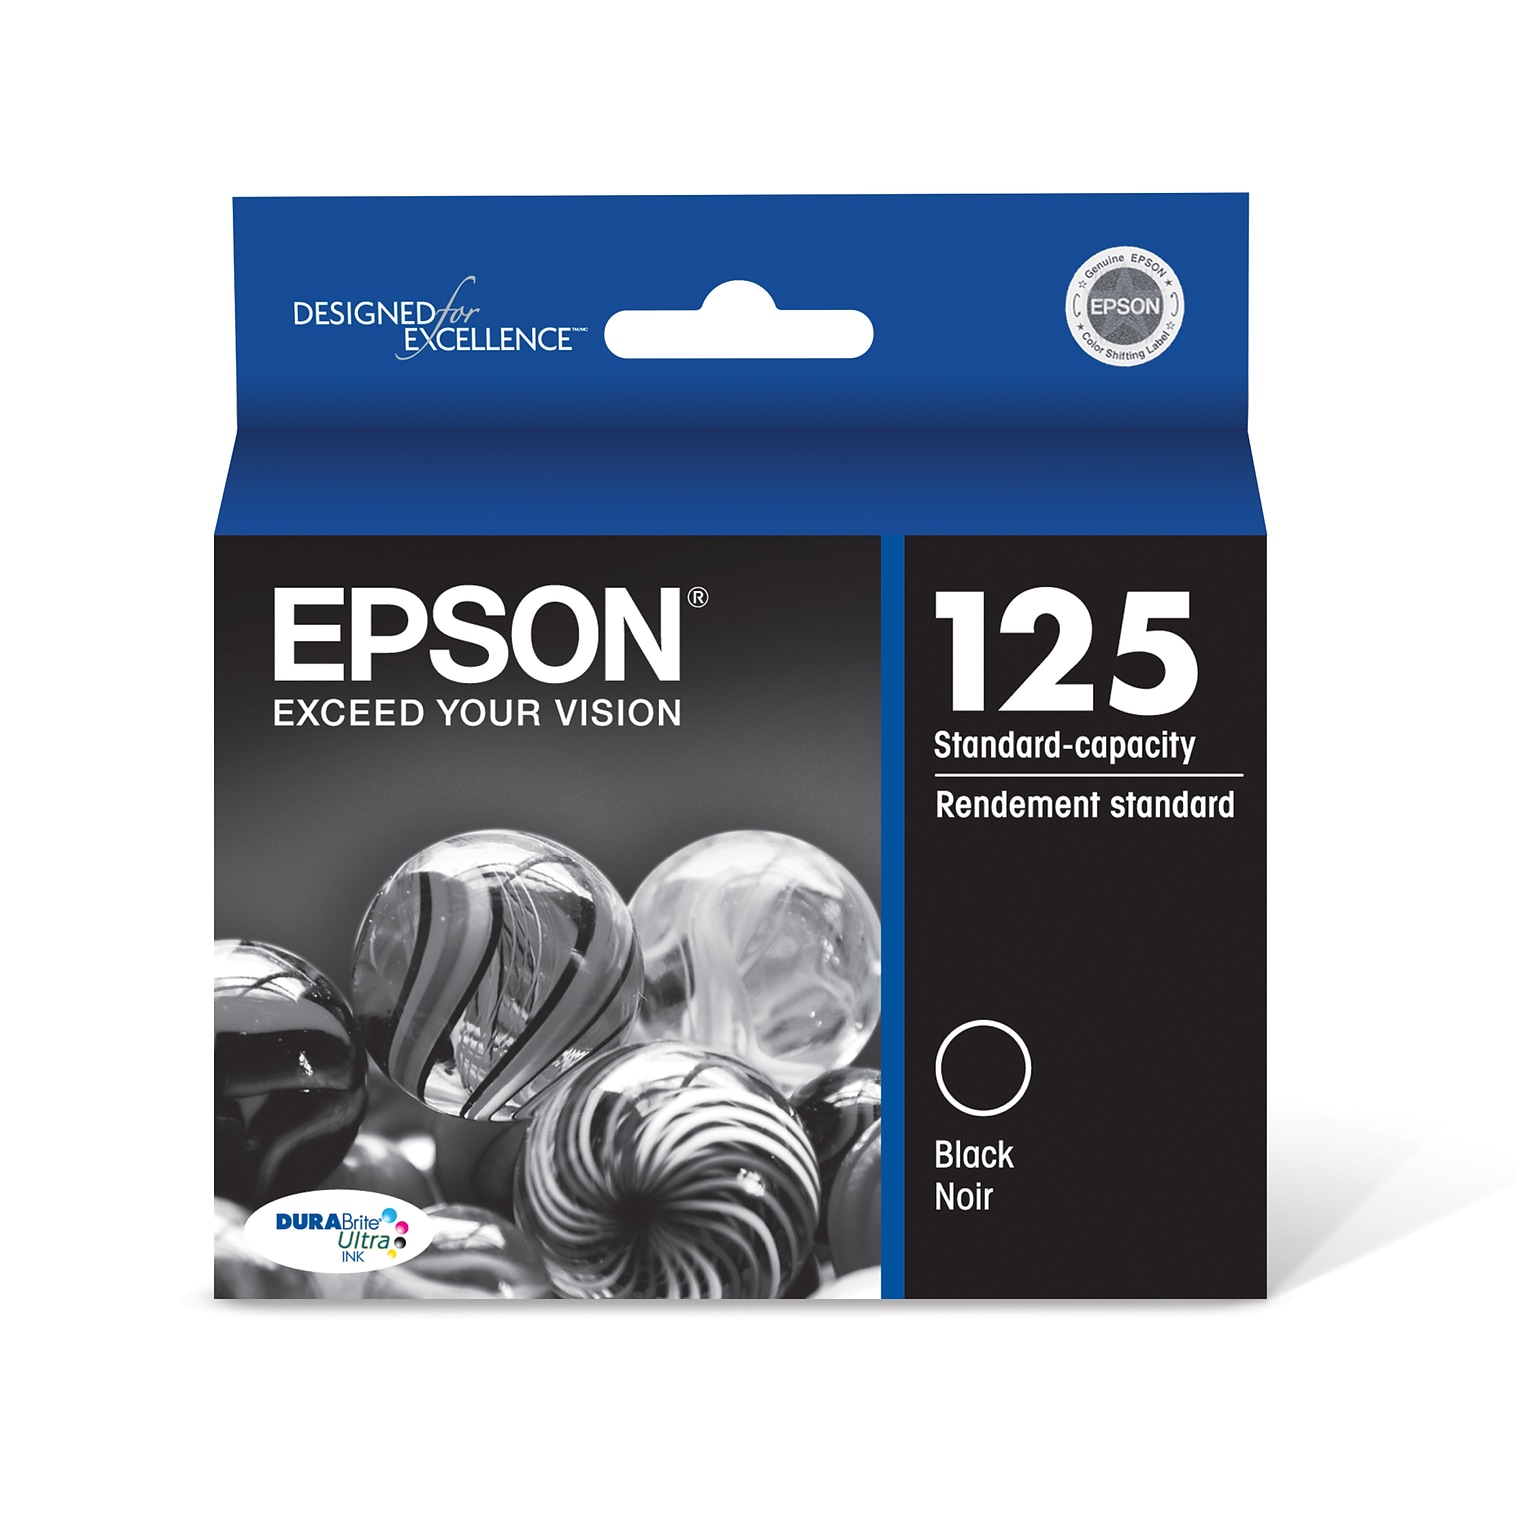 Epson T125 Black Standard Yield Ink Cartridge, Prints Up to 385 Pages (T125120-S)